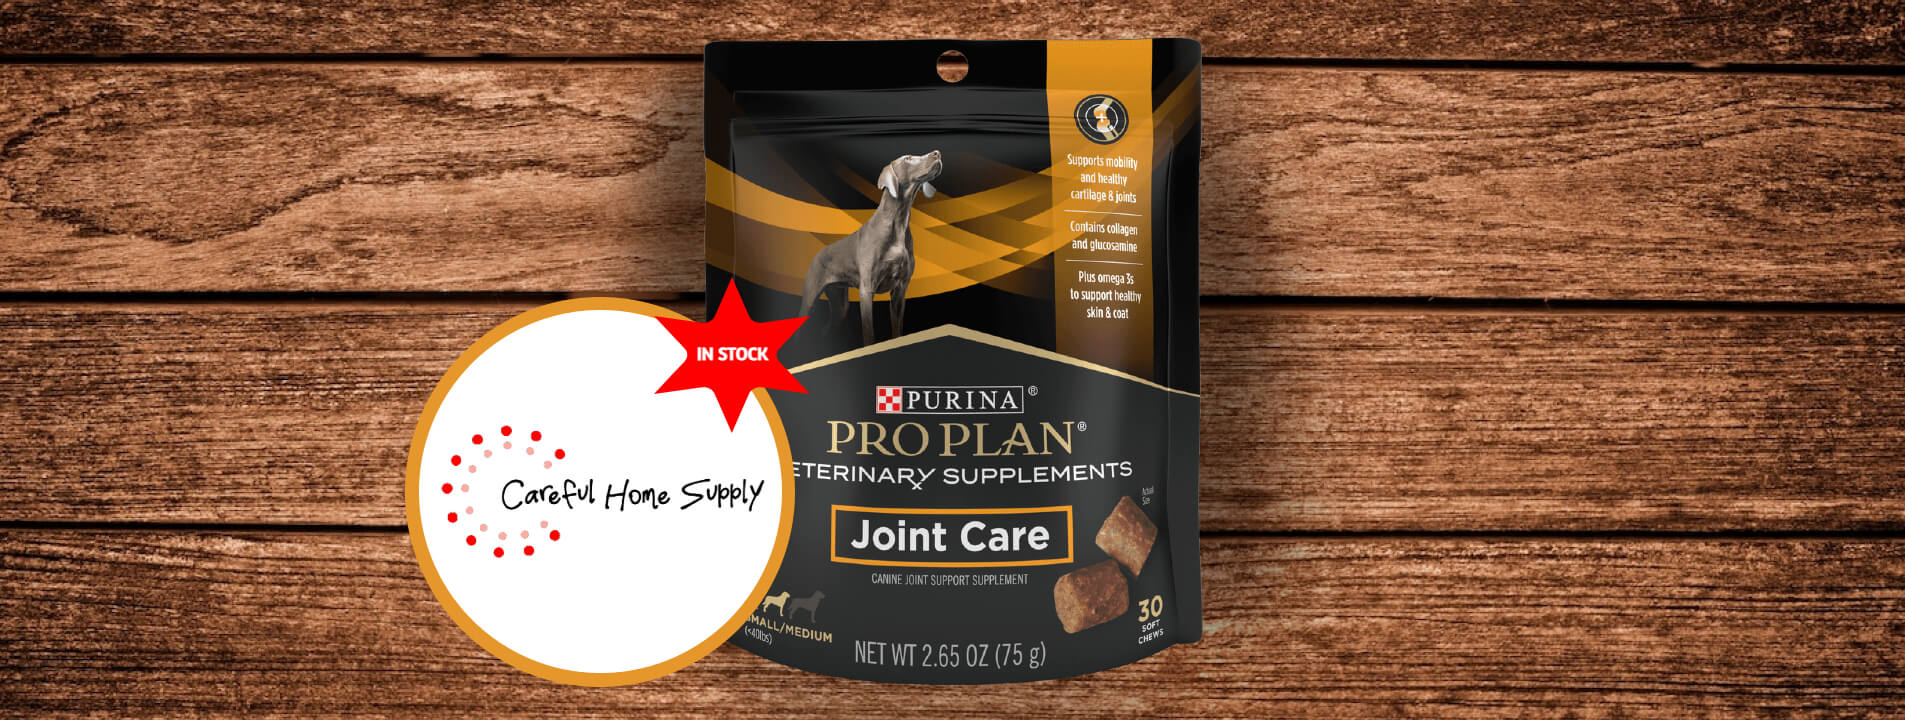 Purina pro plan available